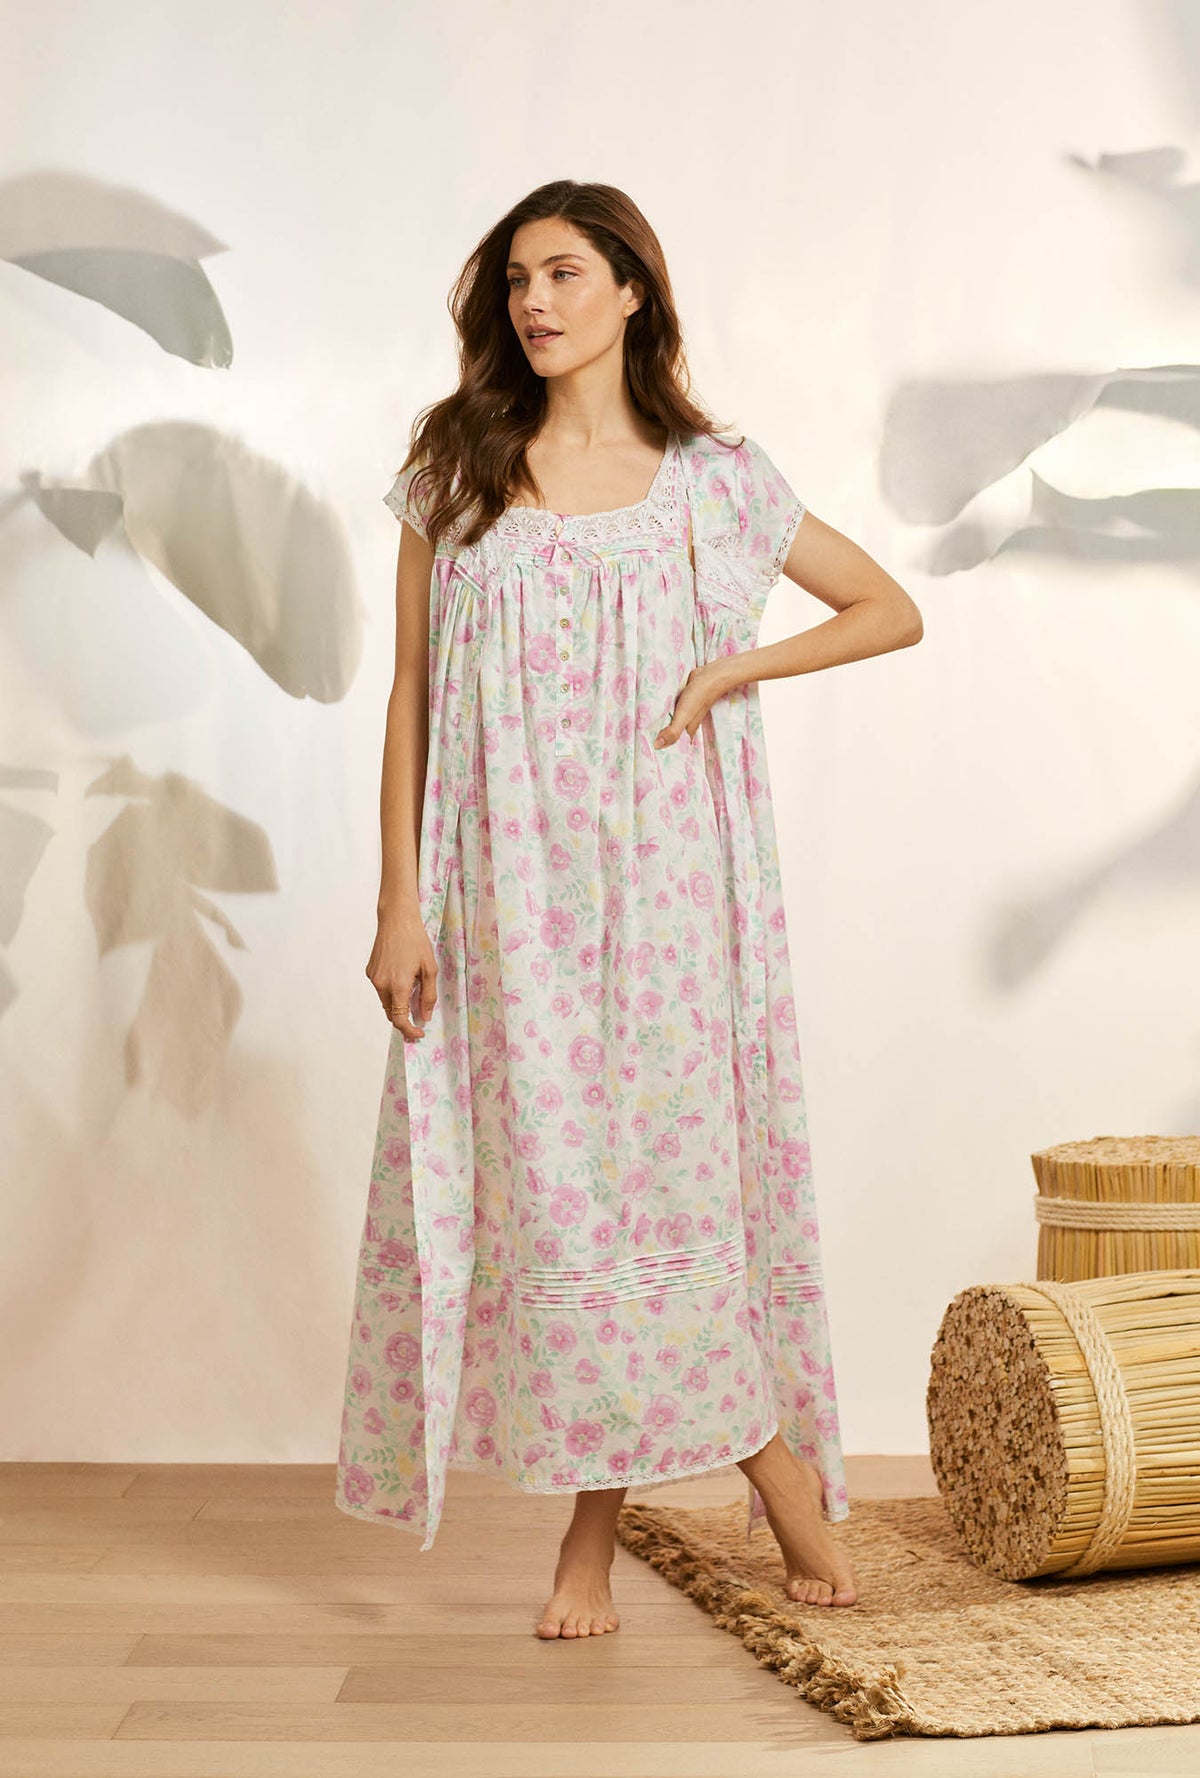 A lady wearing pink sleeveless eileen cotton nightgown with wildflower print.